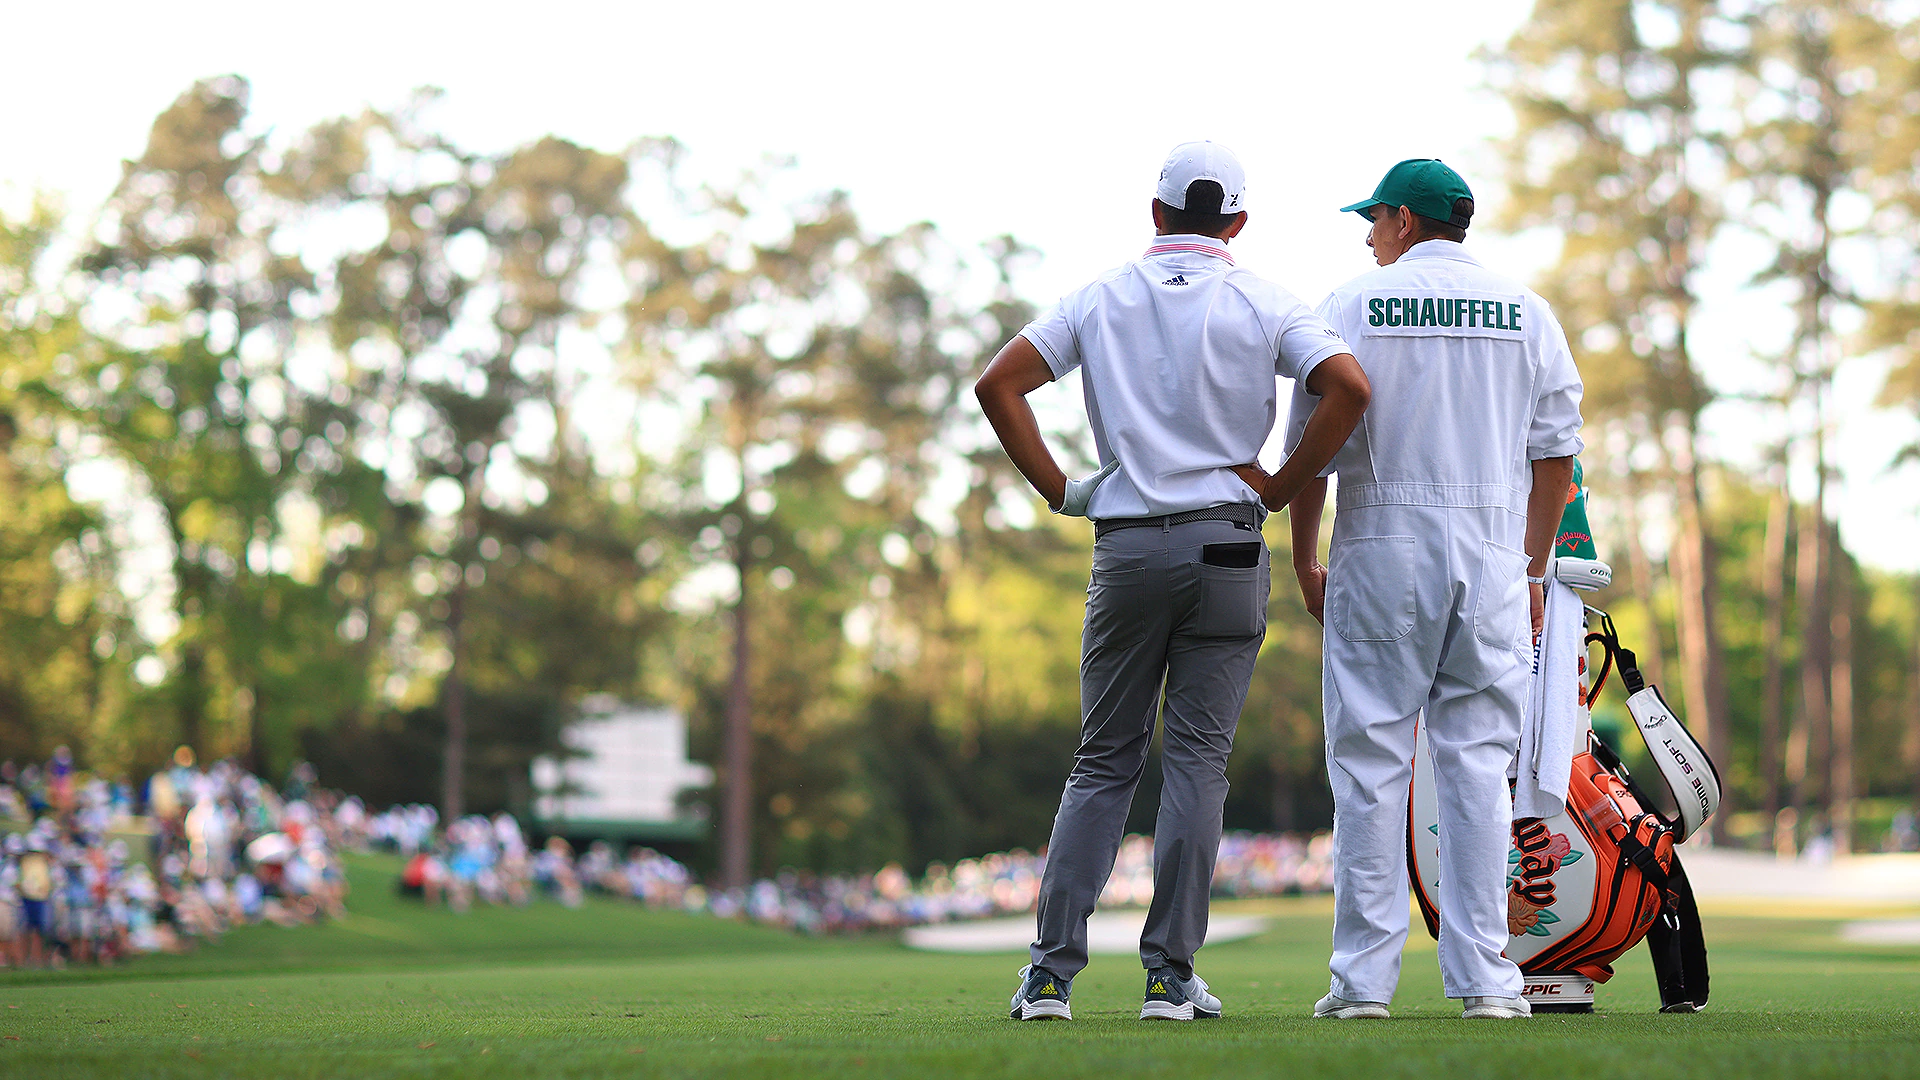 Masters 2021: Xander Schauffele’s back-nine rally, Masters hopes end in pond at 16